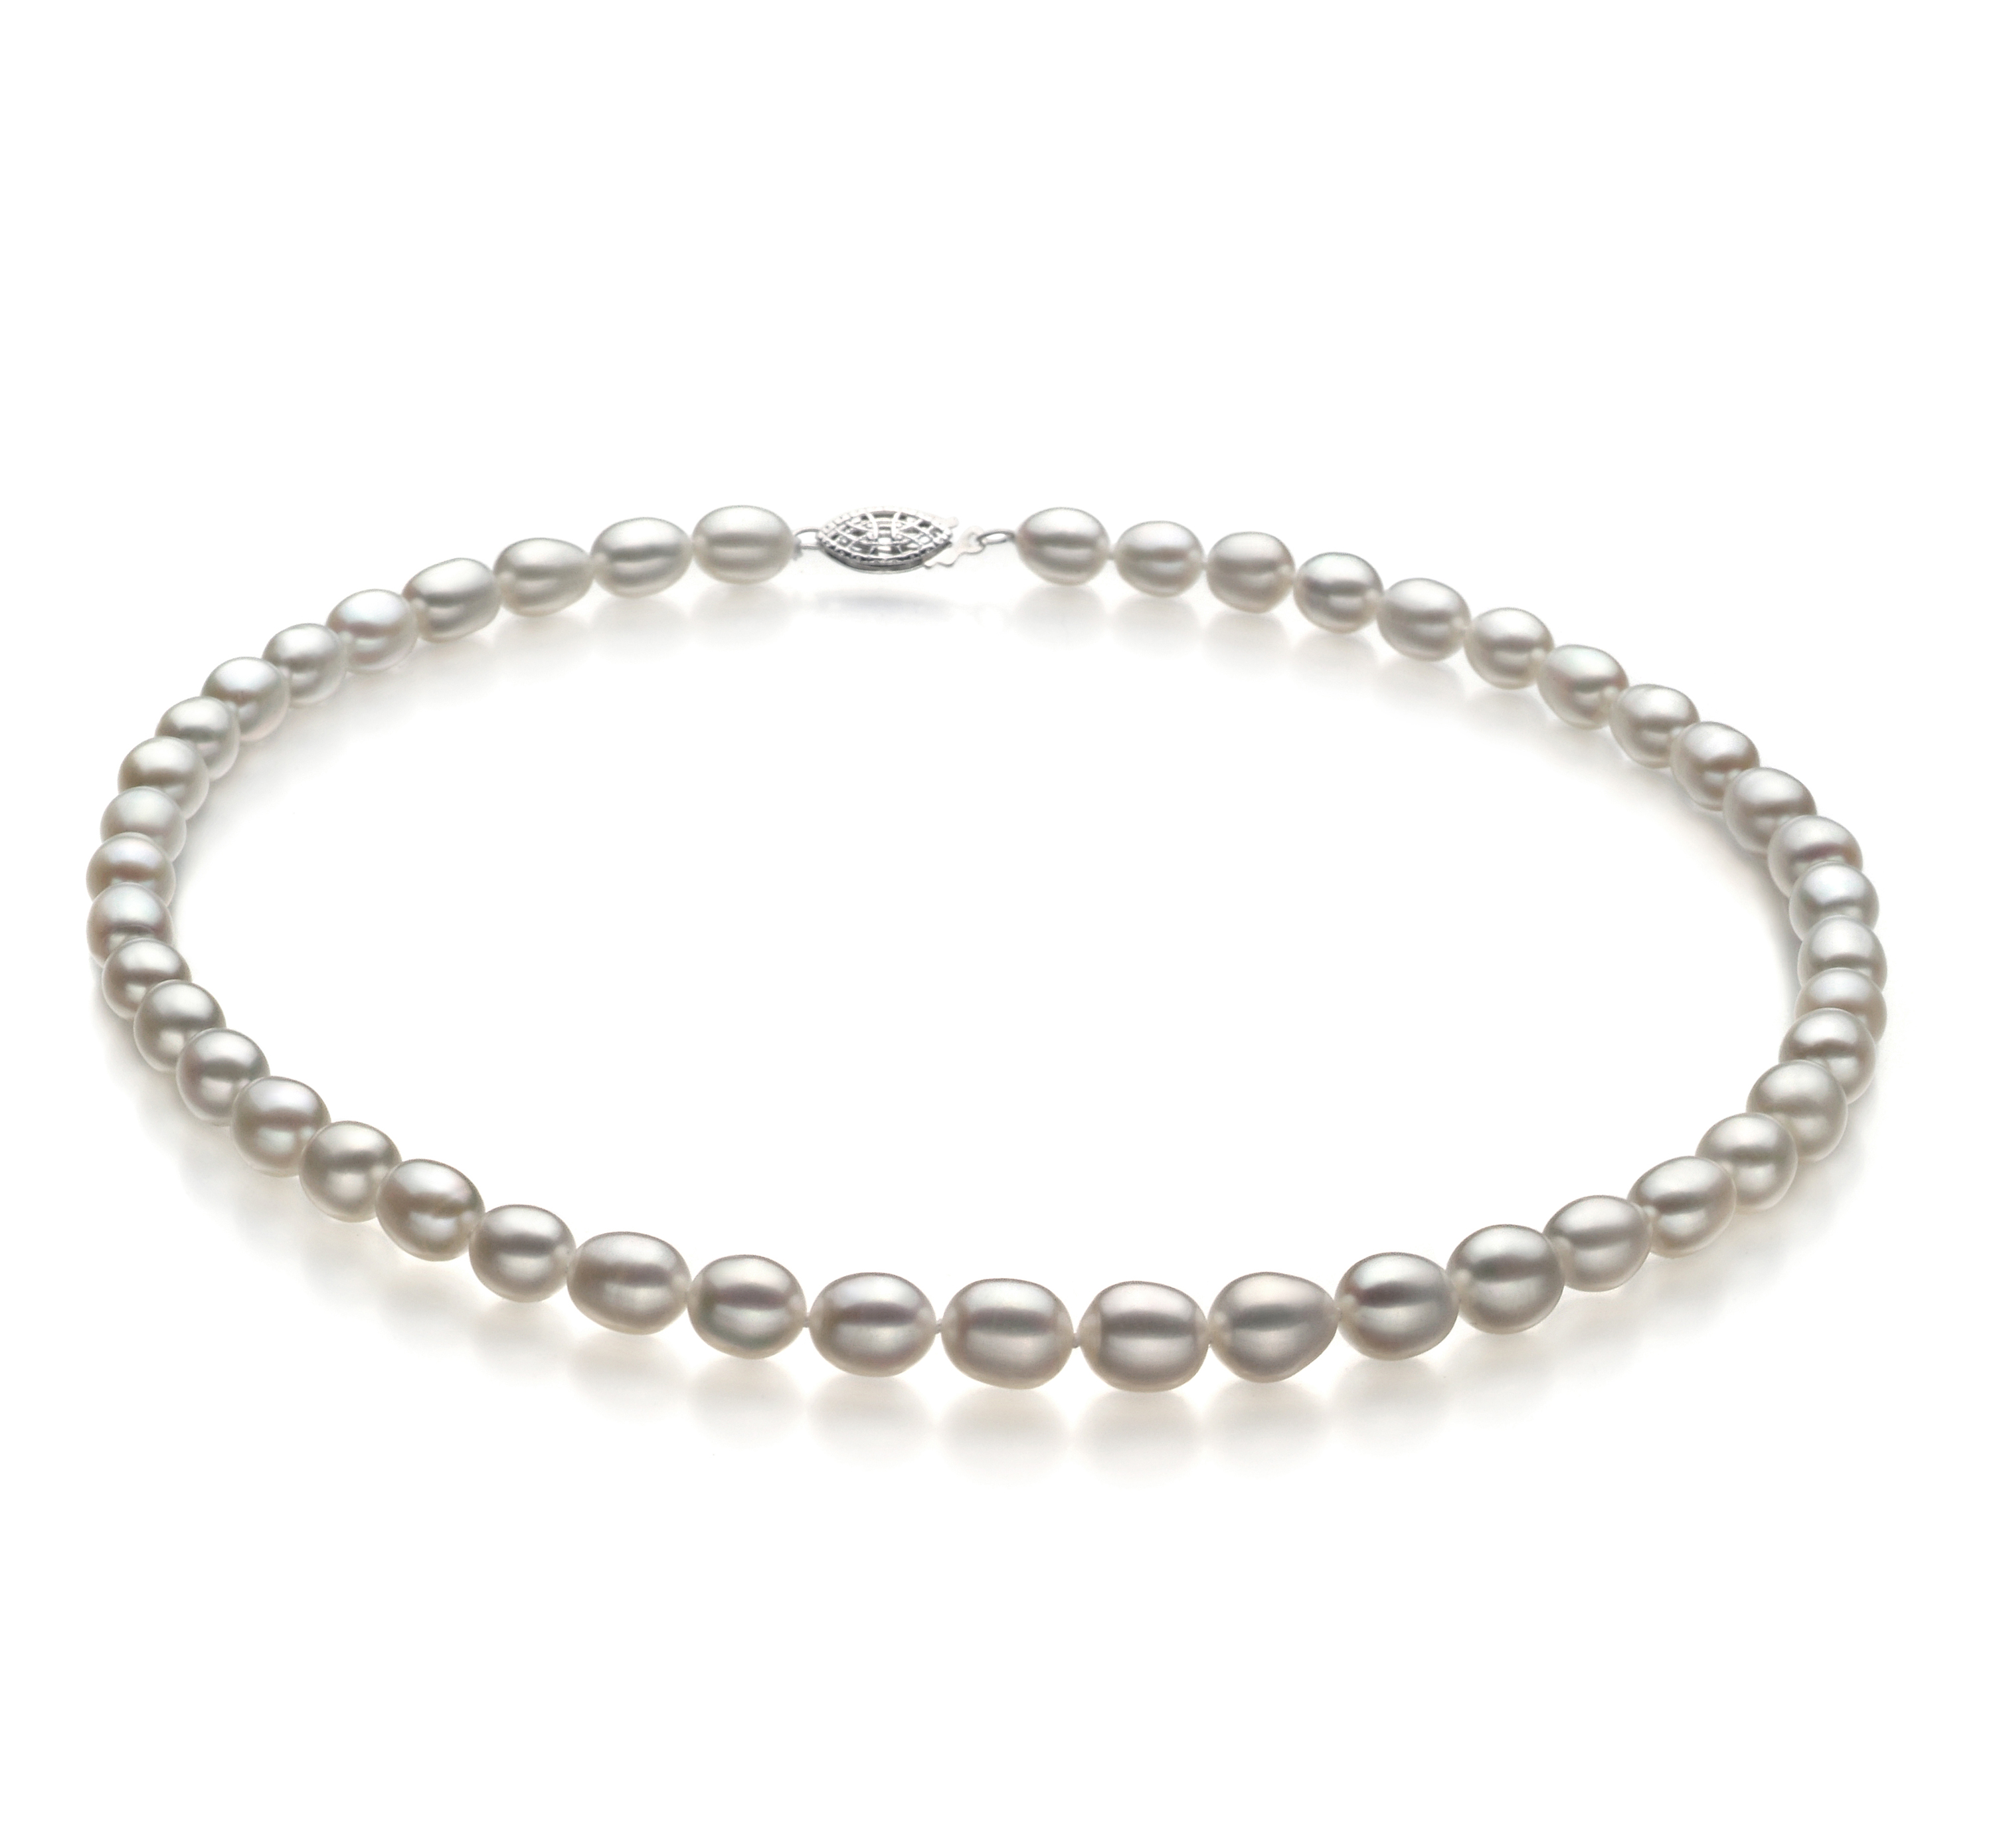 Drop White 8.5-9.5mm AA Quality Freshwater Cultured Pearl Necklace